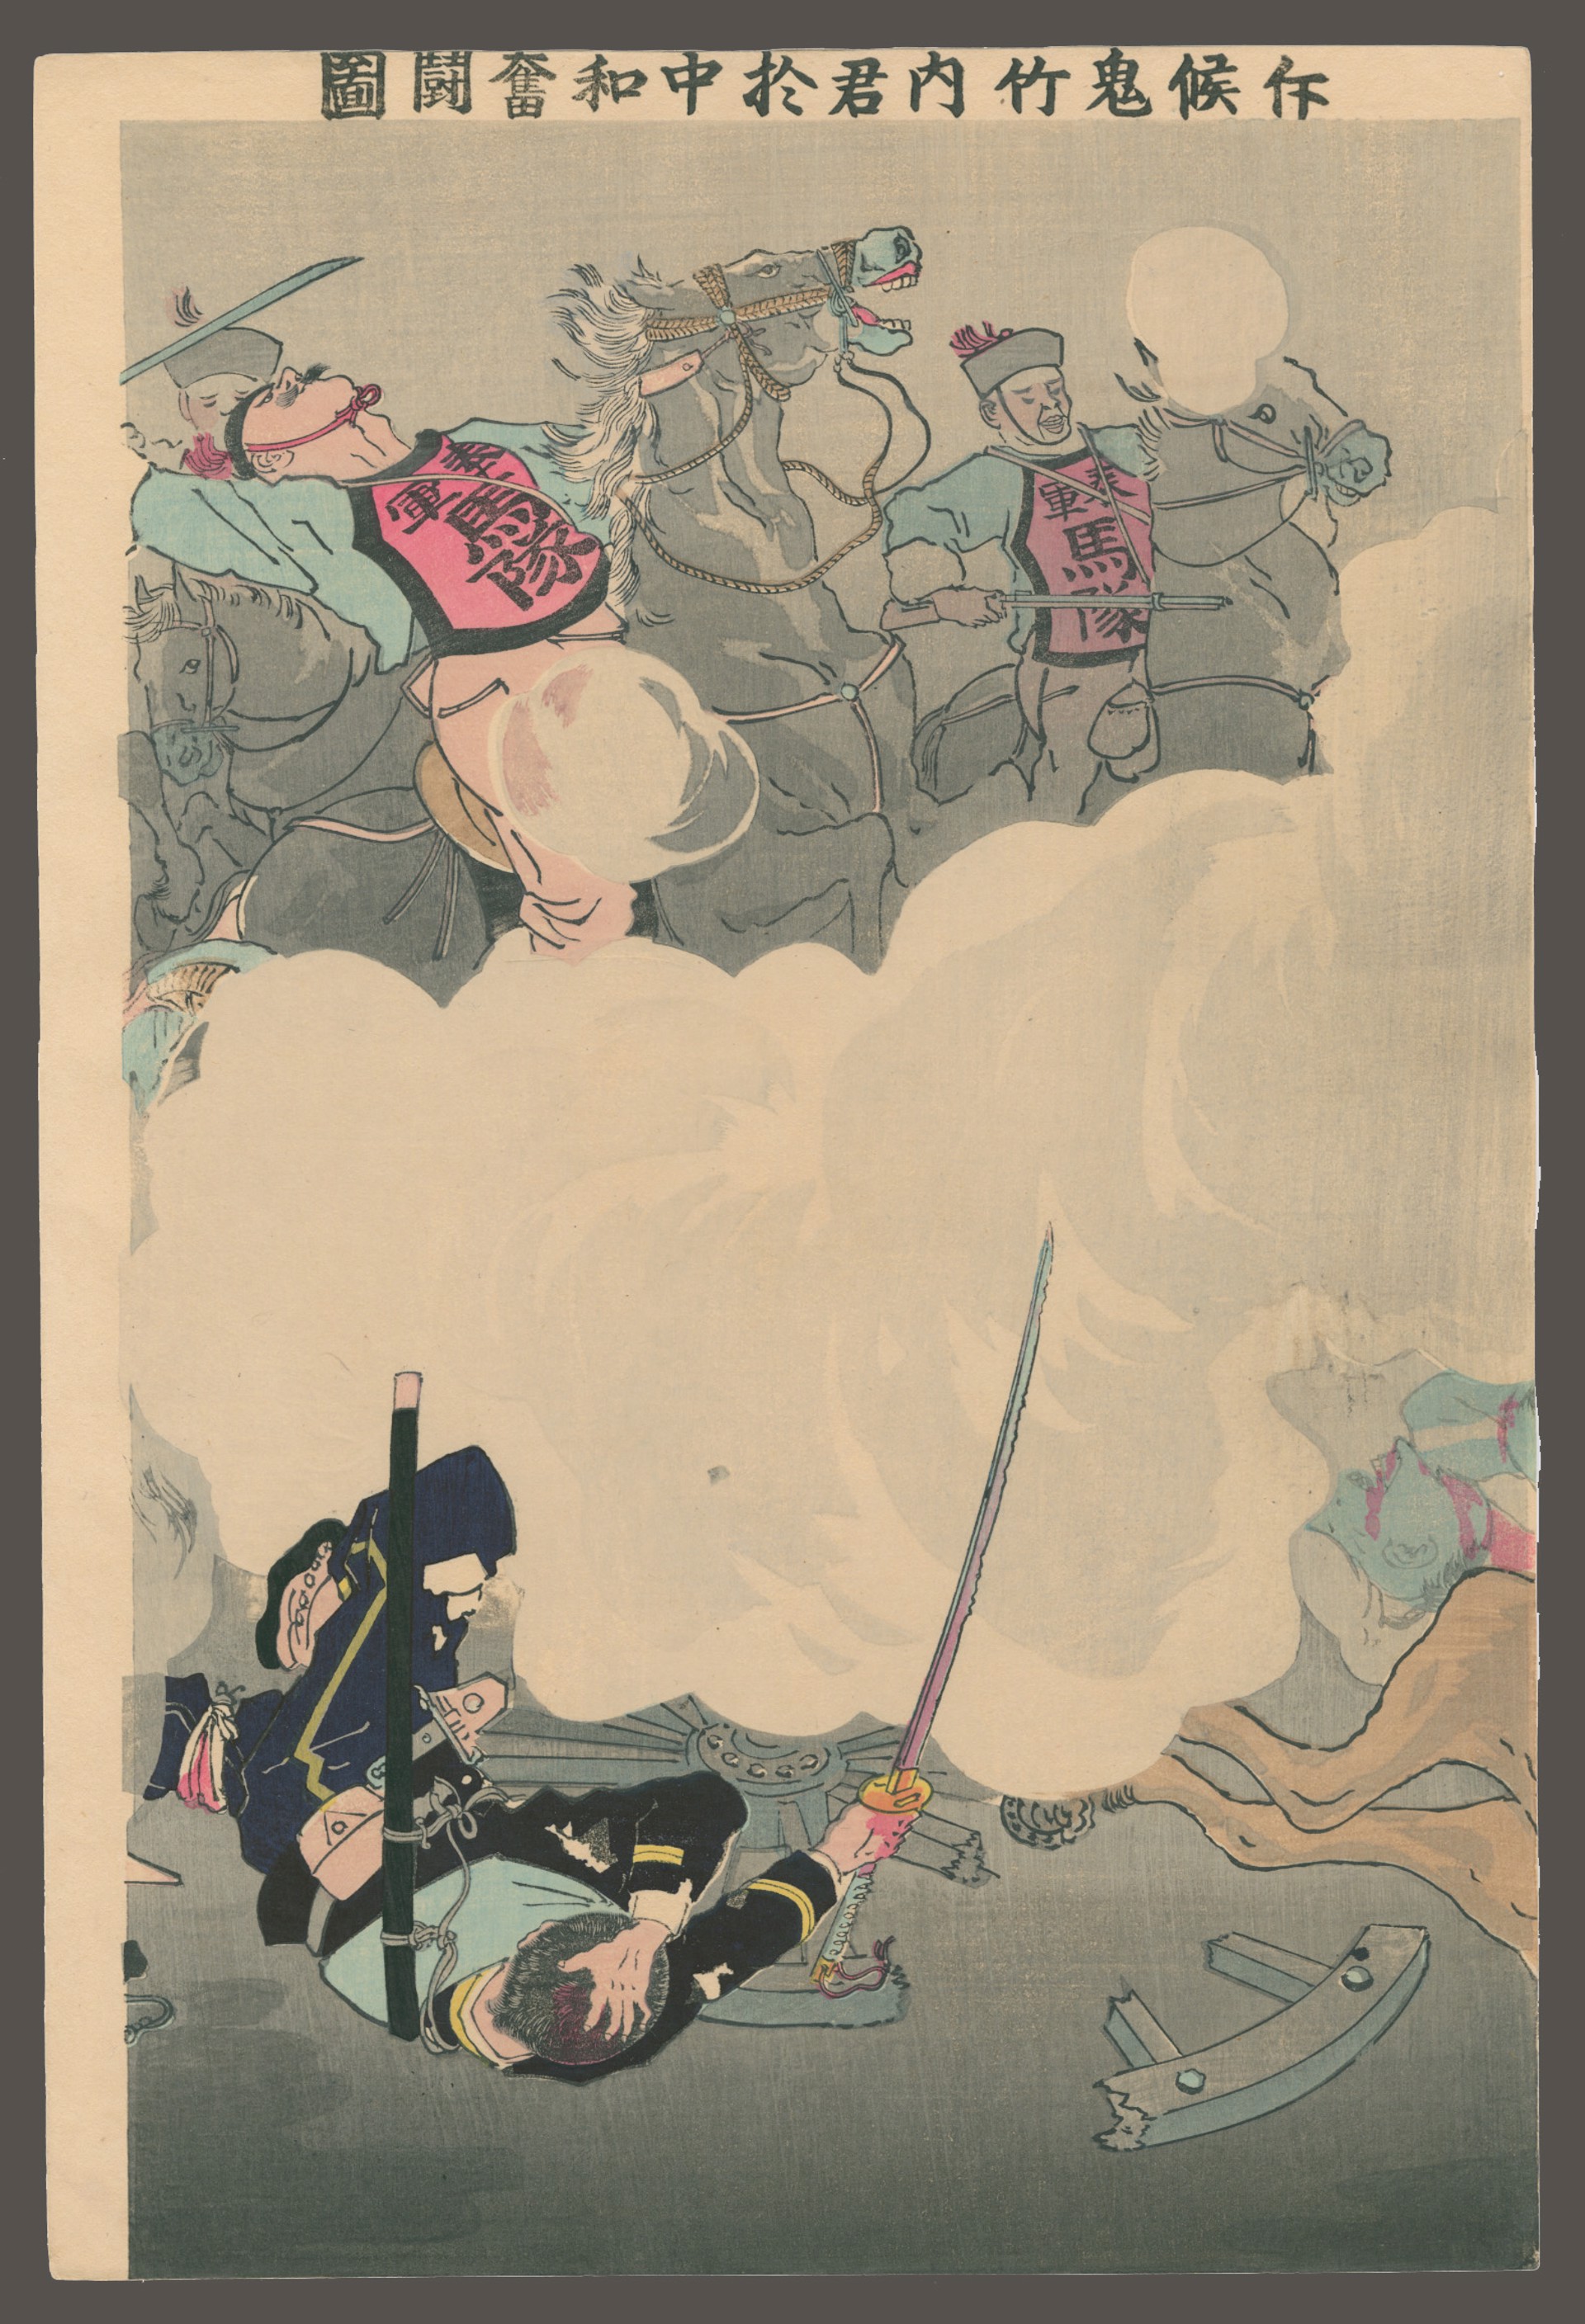 Picture of the Heroic Fight of scout Lt. Takenouchi at Chunghua Sino - Japanese war by Beisaku